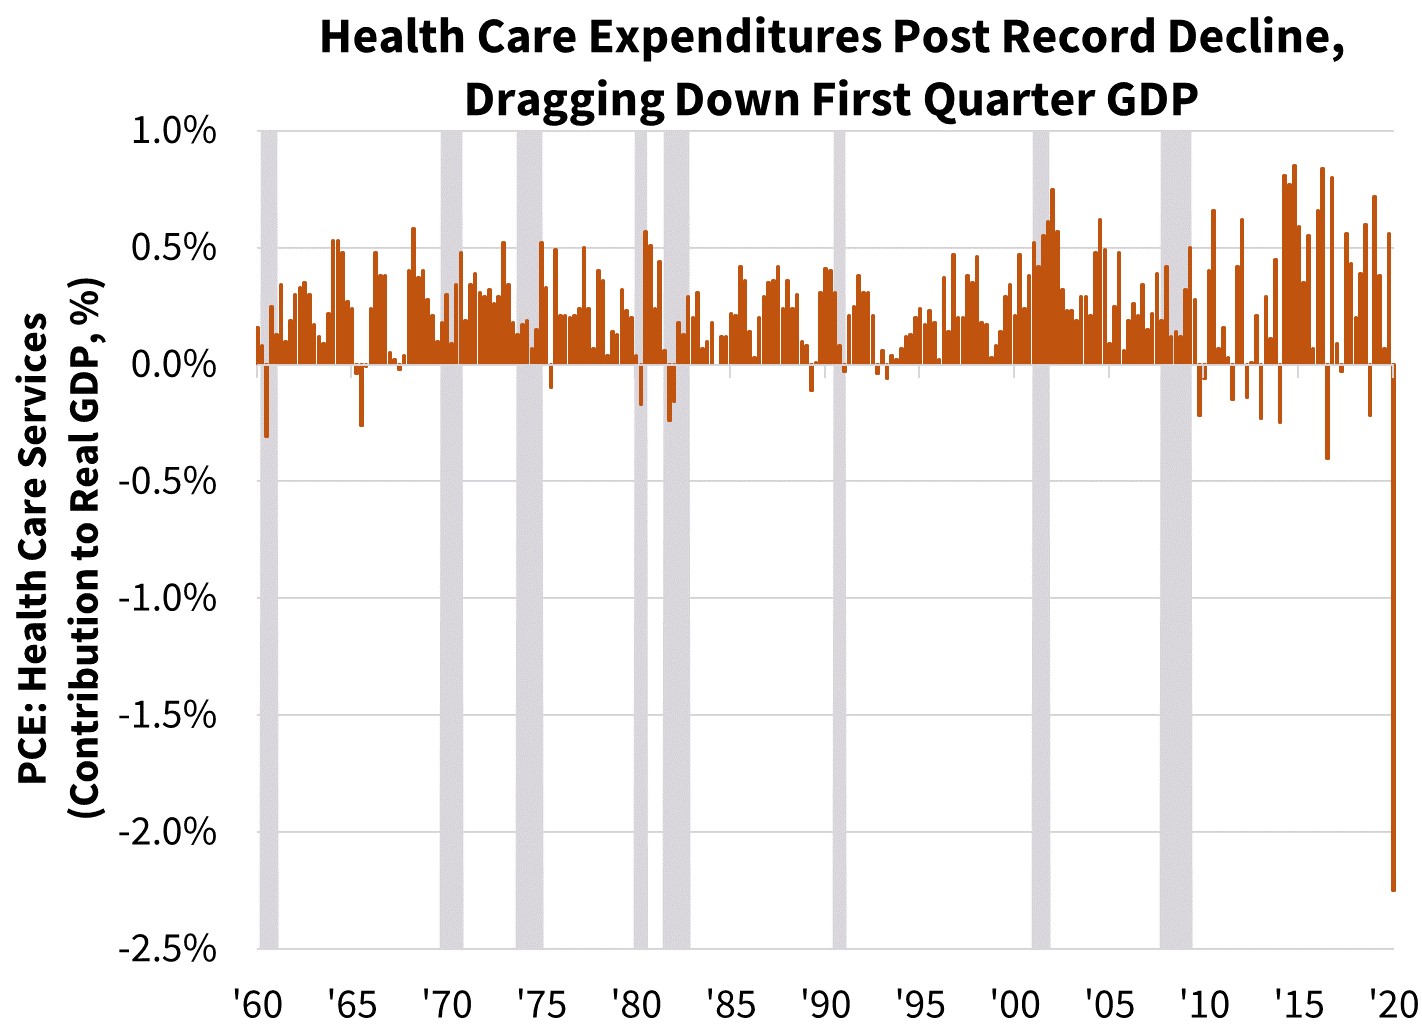  Healthcare Expenditures Post Record Decline, Dragging Down First Quarter 